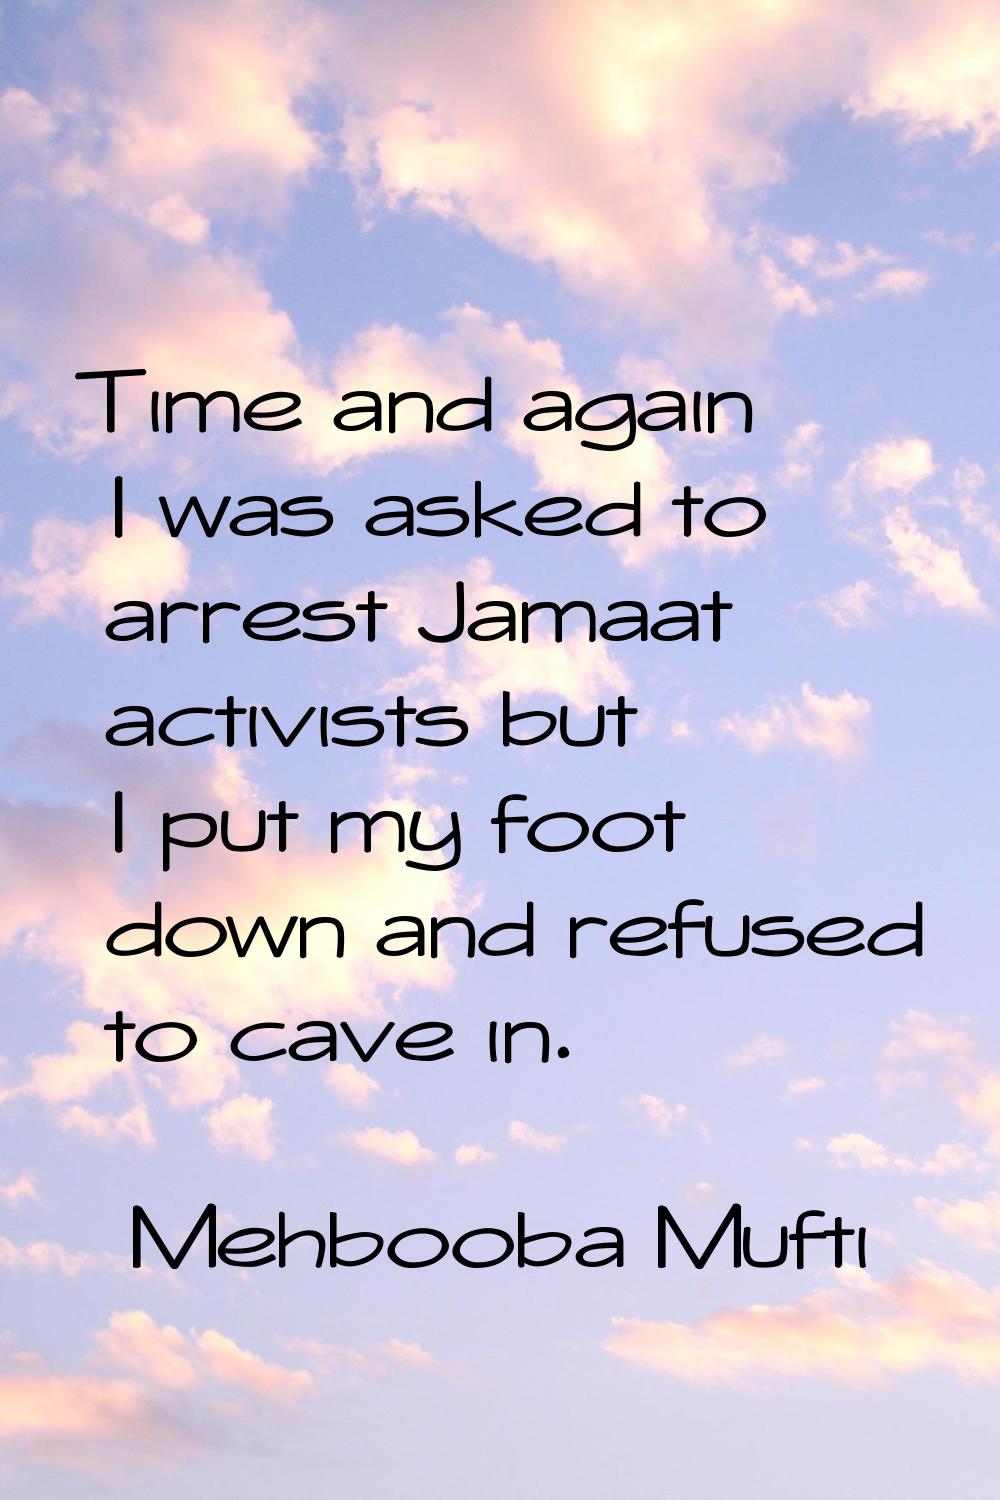 Time and again I was asked to arrest Jamaat activists but I put my foot down and refused to cave in